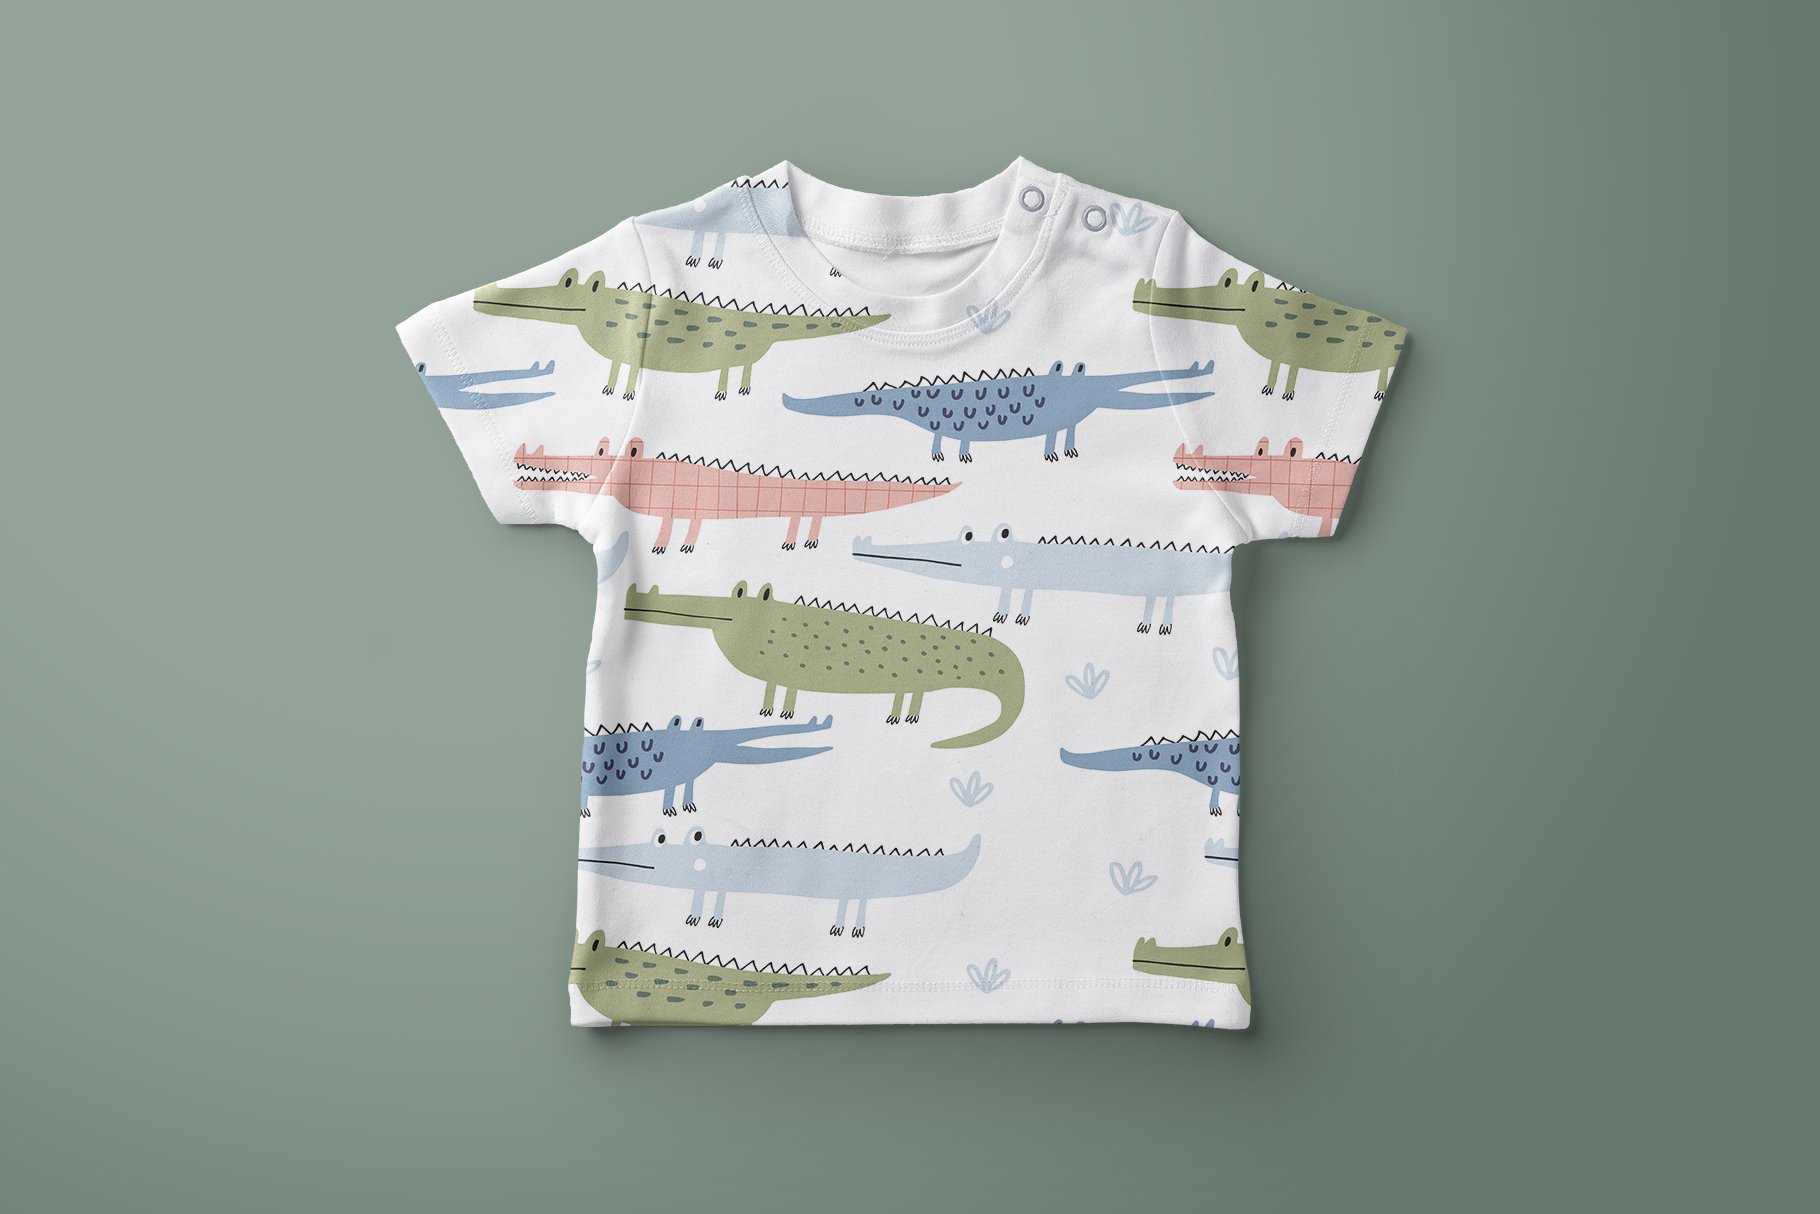 Classic white t-shirt with crocodiles.